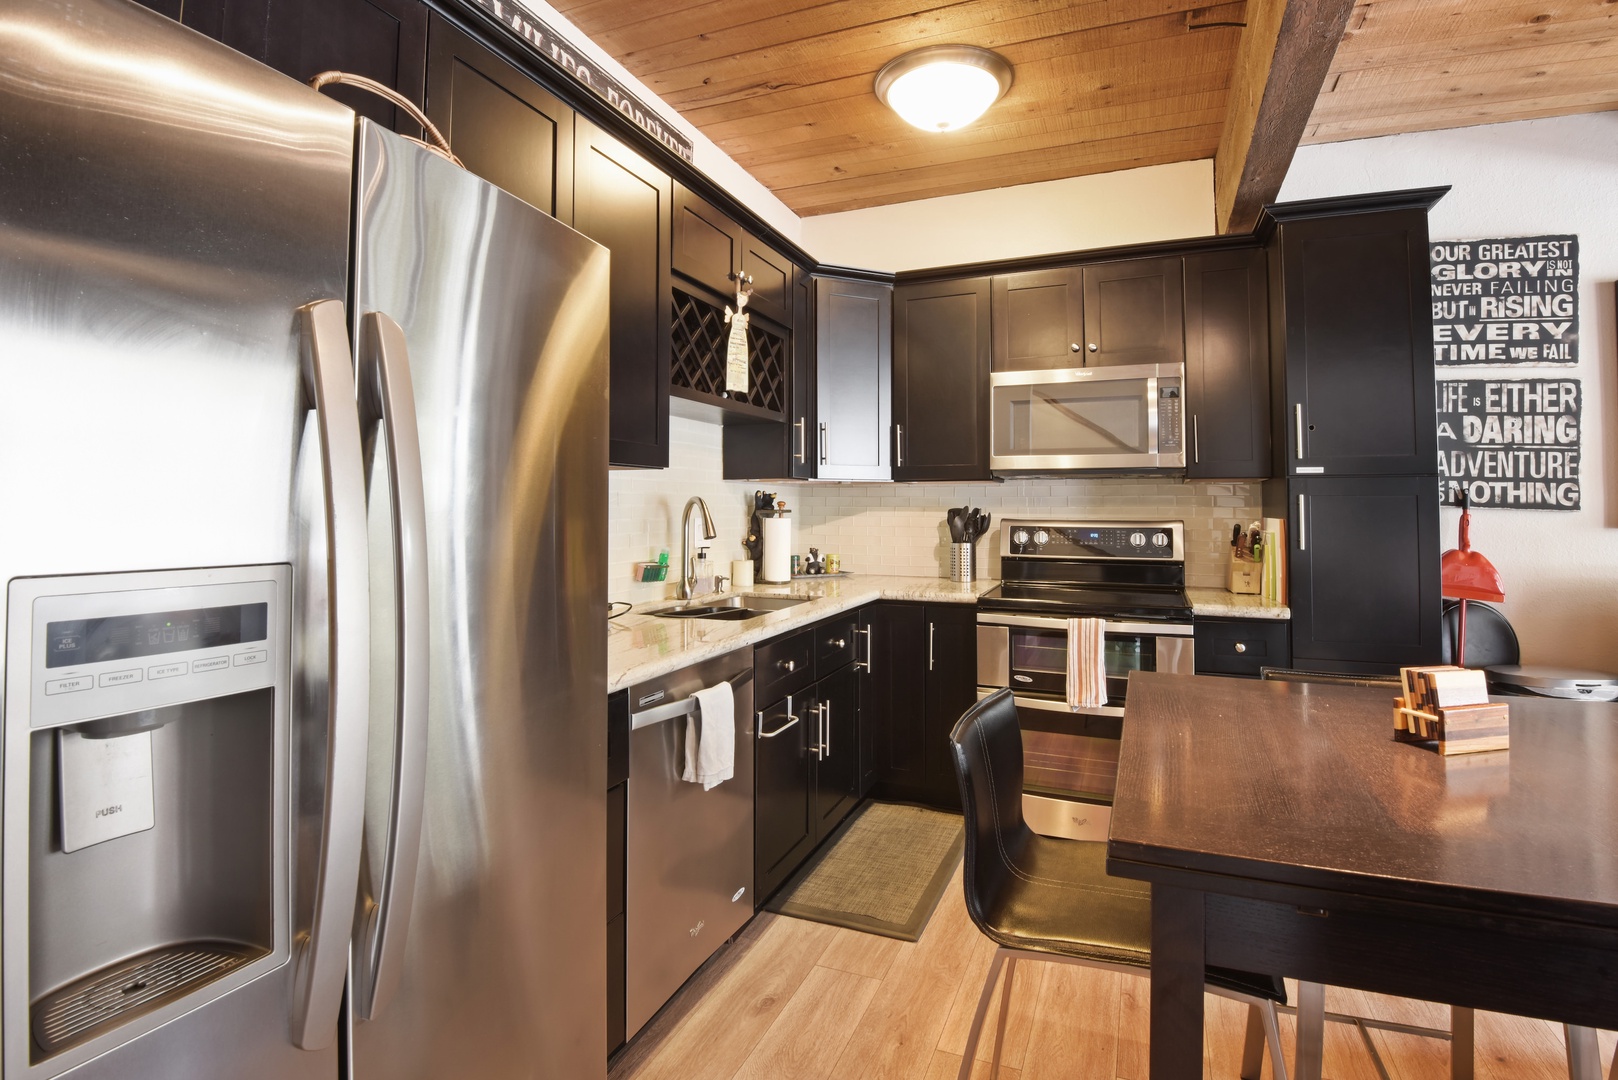 Modern kitchen with stainless steel appliances, drip coffee maker, knife set and more